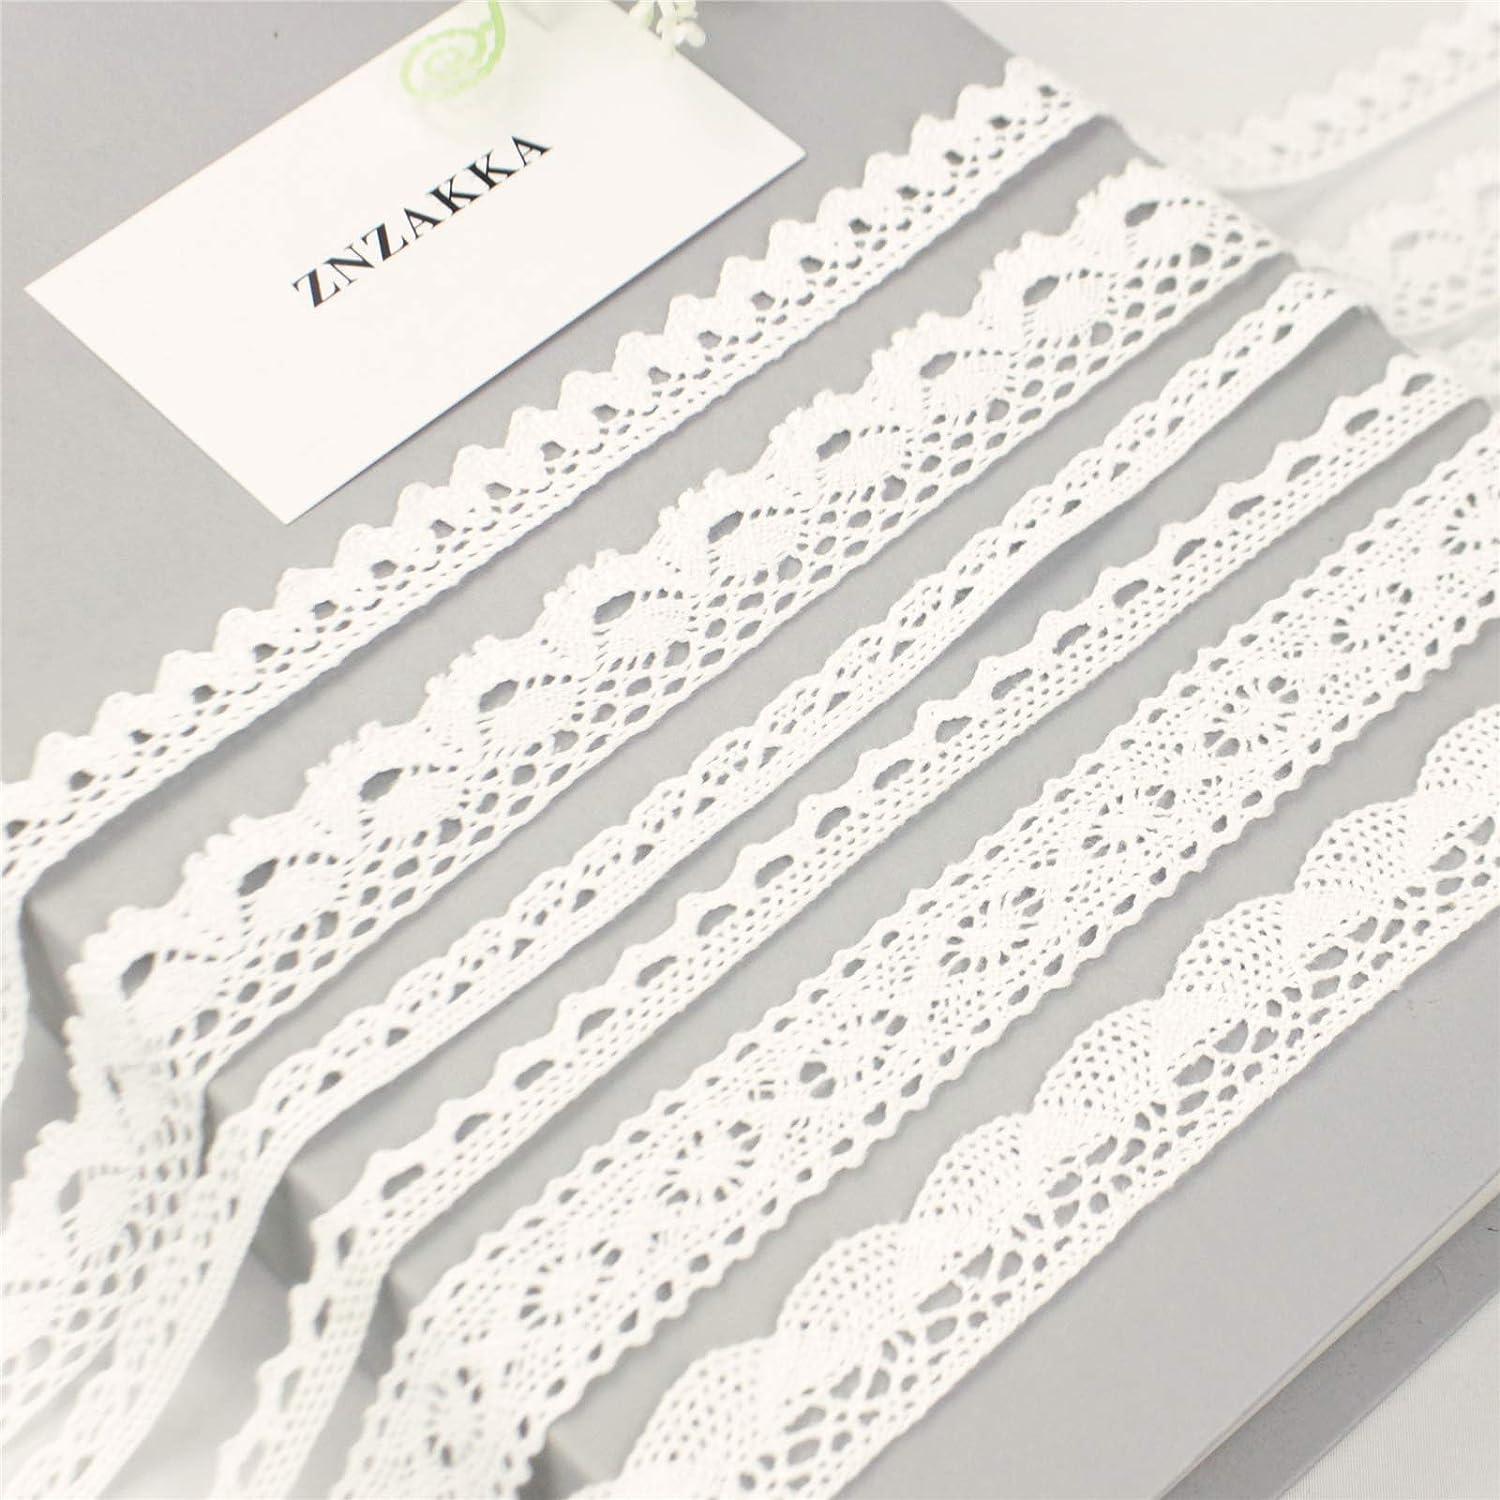 HERZWILD 32.8 Yards White Sewing Lace Ribbon by The Yard Cotton Lace Ribbon  White Vintage Decorative Lace Trim Crochet Decorative Lace Fabric for